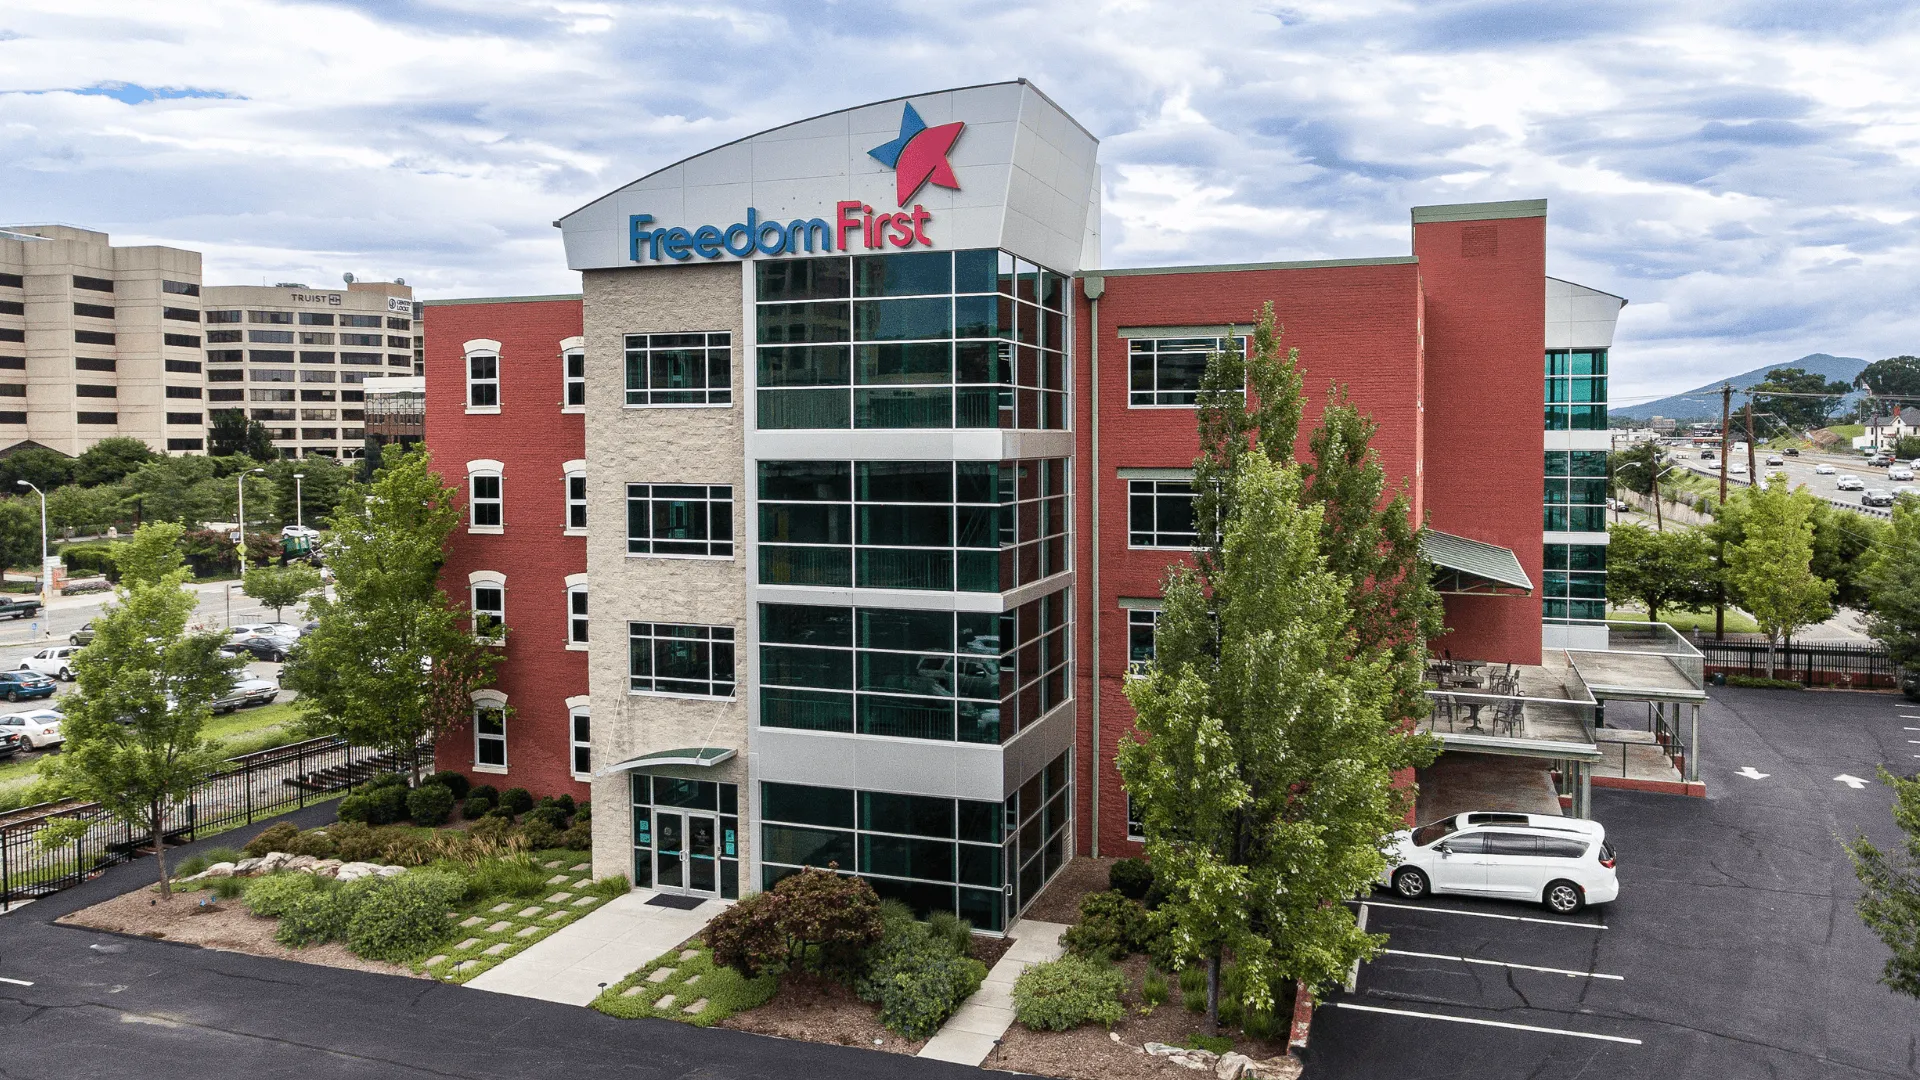 The exterior of the Freedom First Credit Union building on Bullitt Avenue in Roanoke, Virginia.